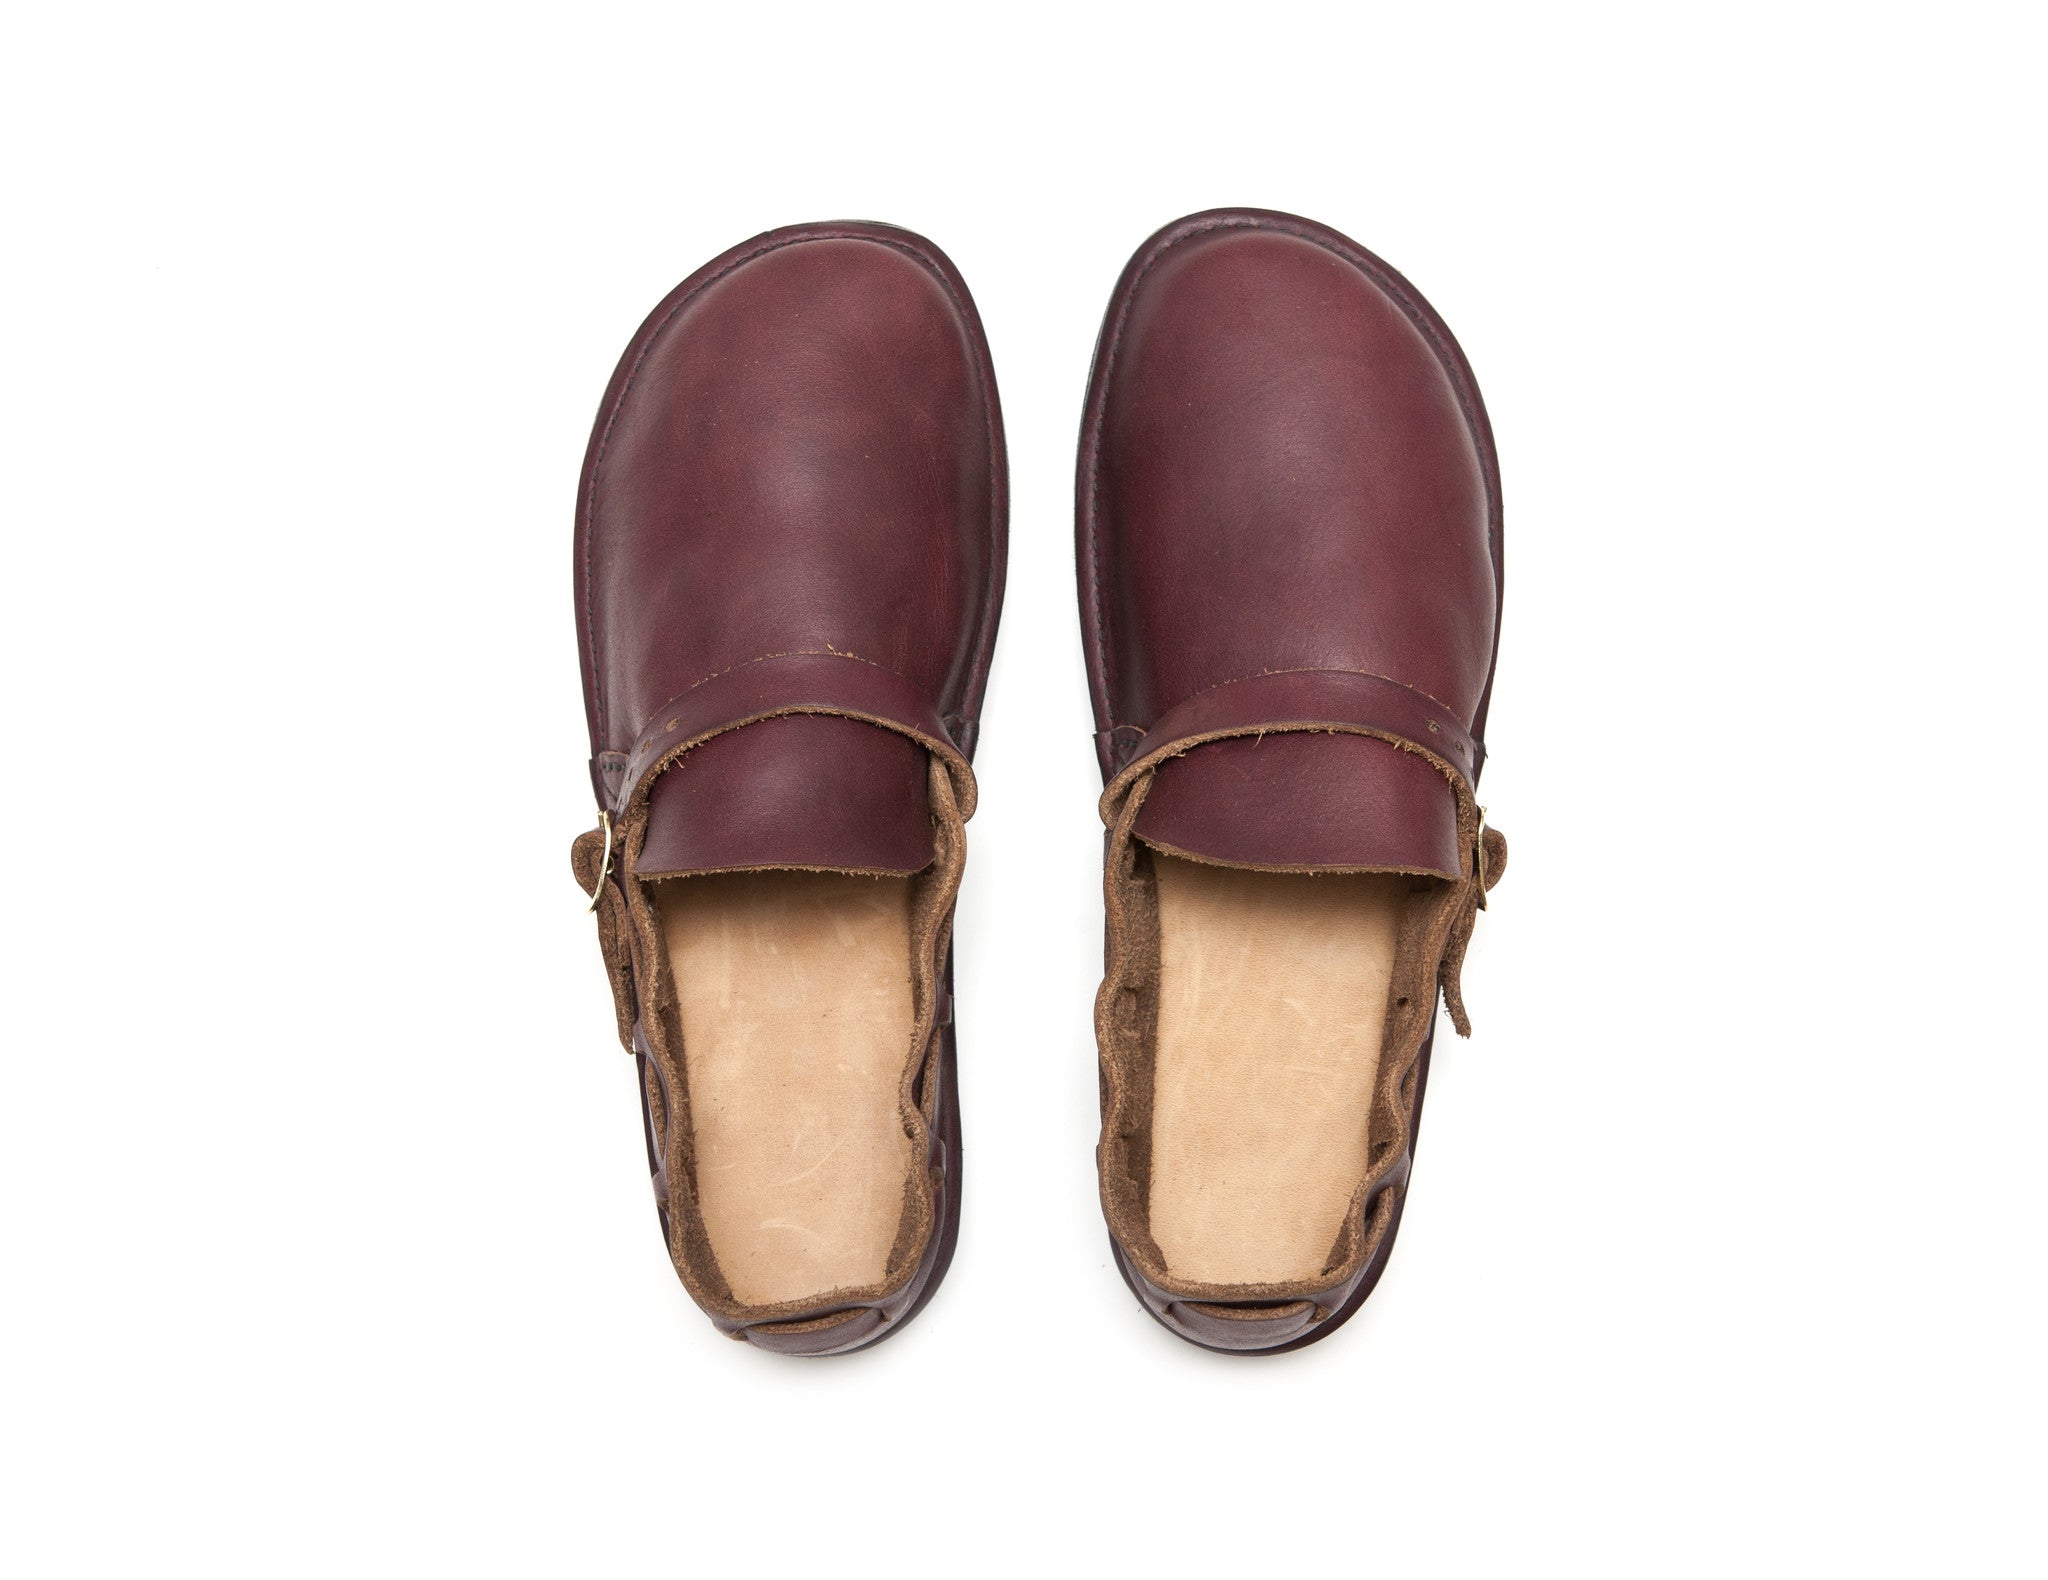 Burgundy Middle English Handmade Leather shoes by Aurora Shoe Co. - Top down, white background.